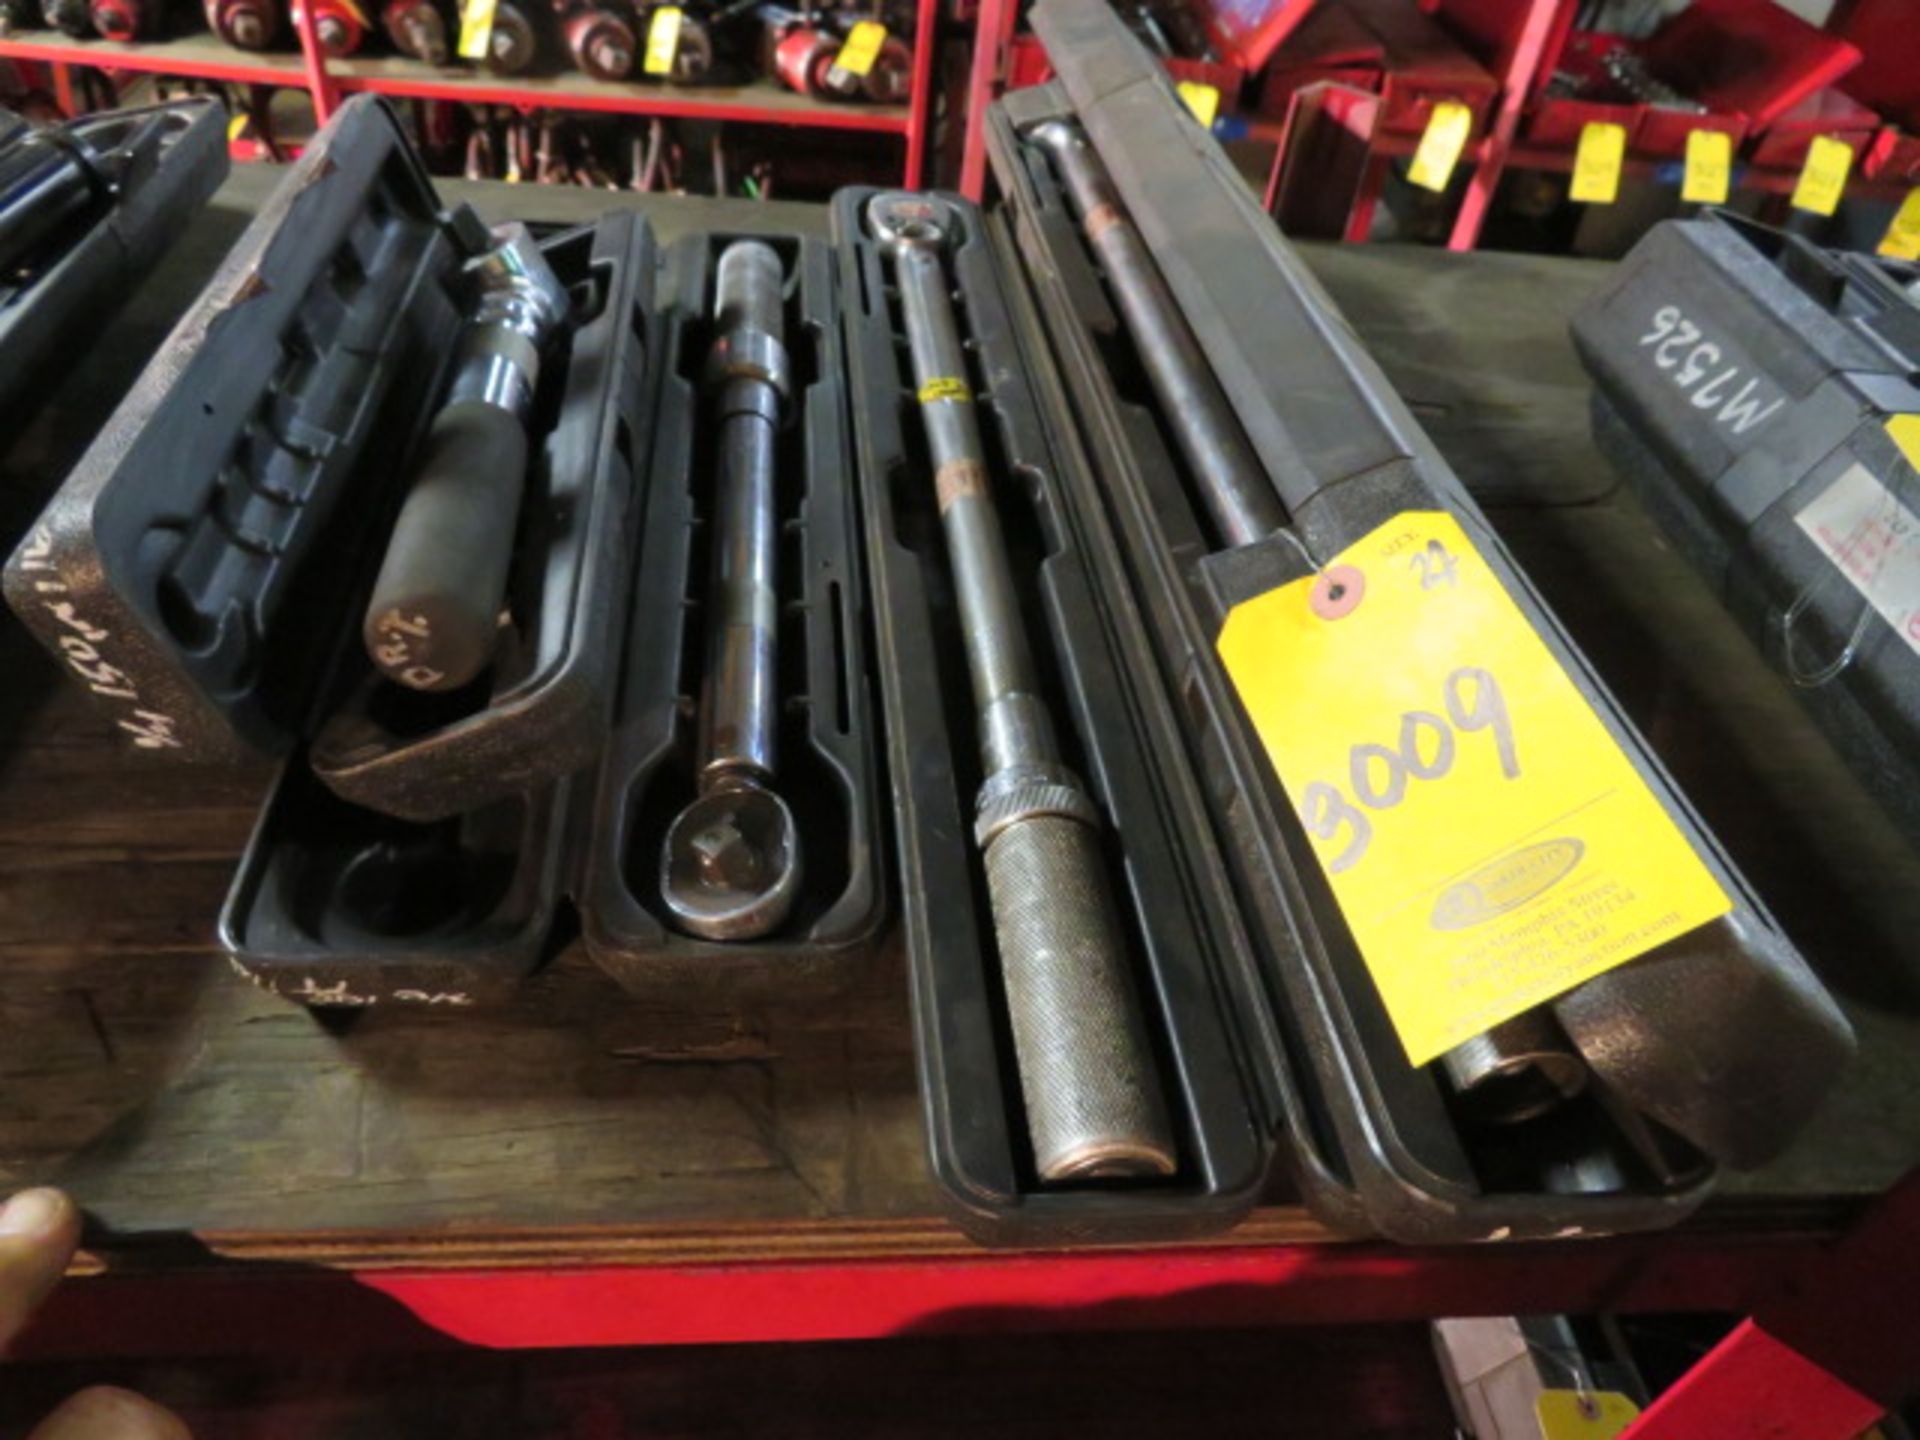 (3) TORQUE WRENCHES 1- 3/8" AND 2- 1/2"